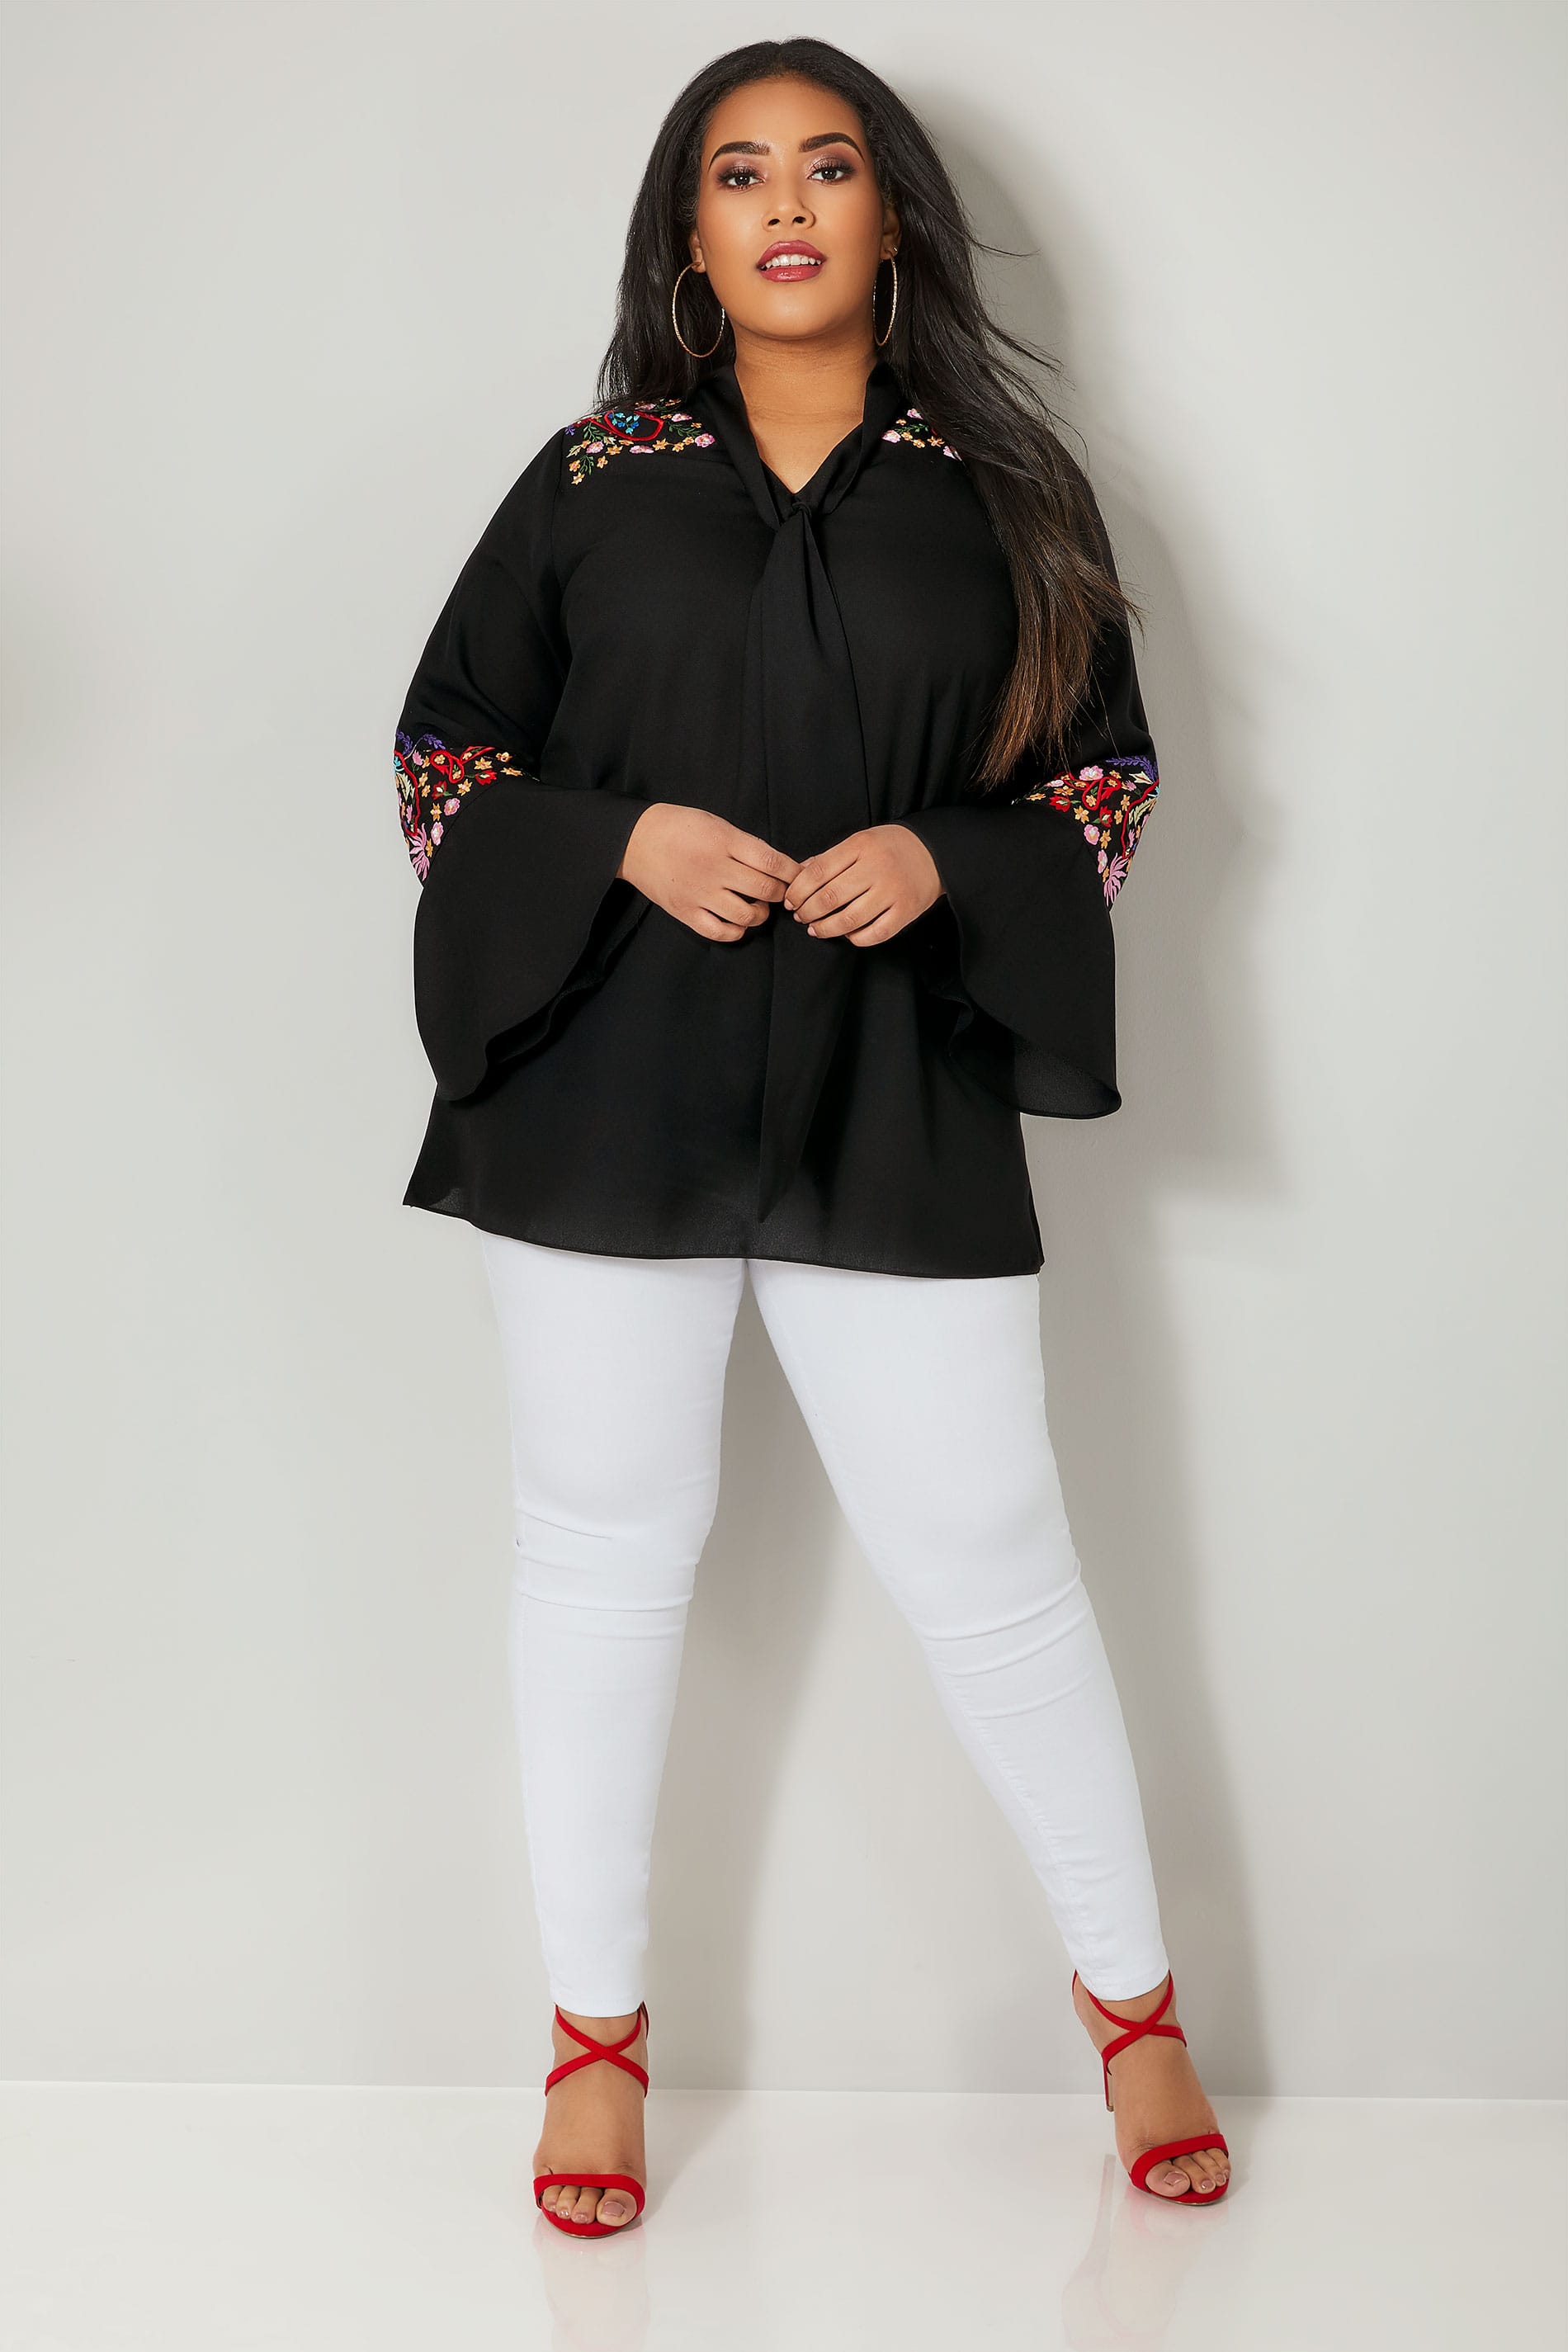 Plus size boutique blouses and tops wholesale Plus Size Wholesale Clothing for Retailers – Blouses Discover the Latest Best Selling Shop women's shirts high-quality blouses